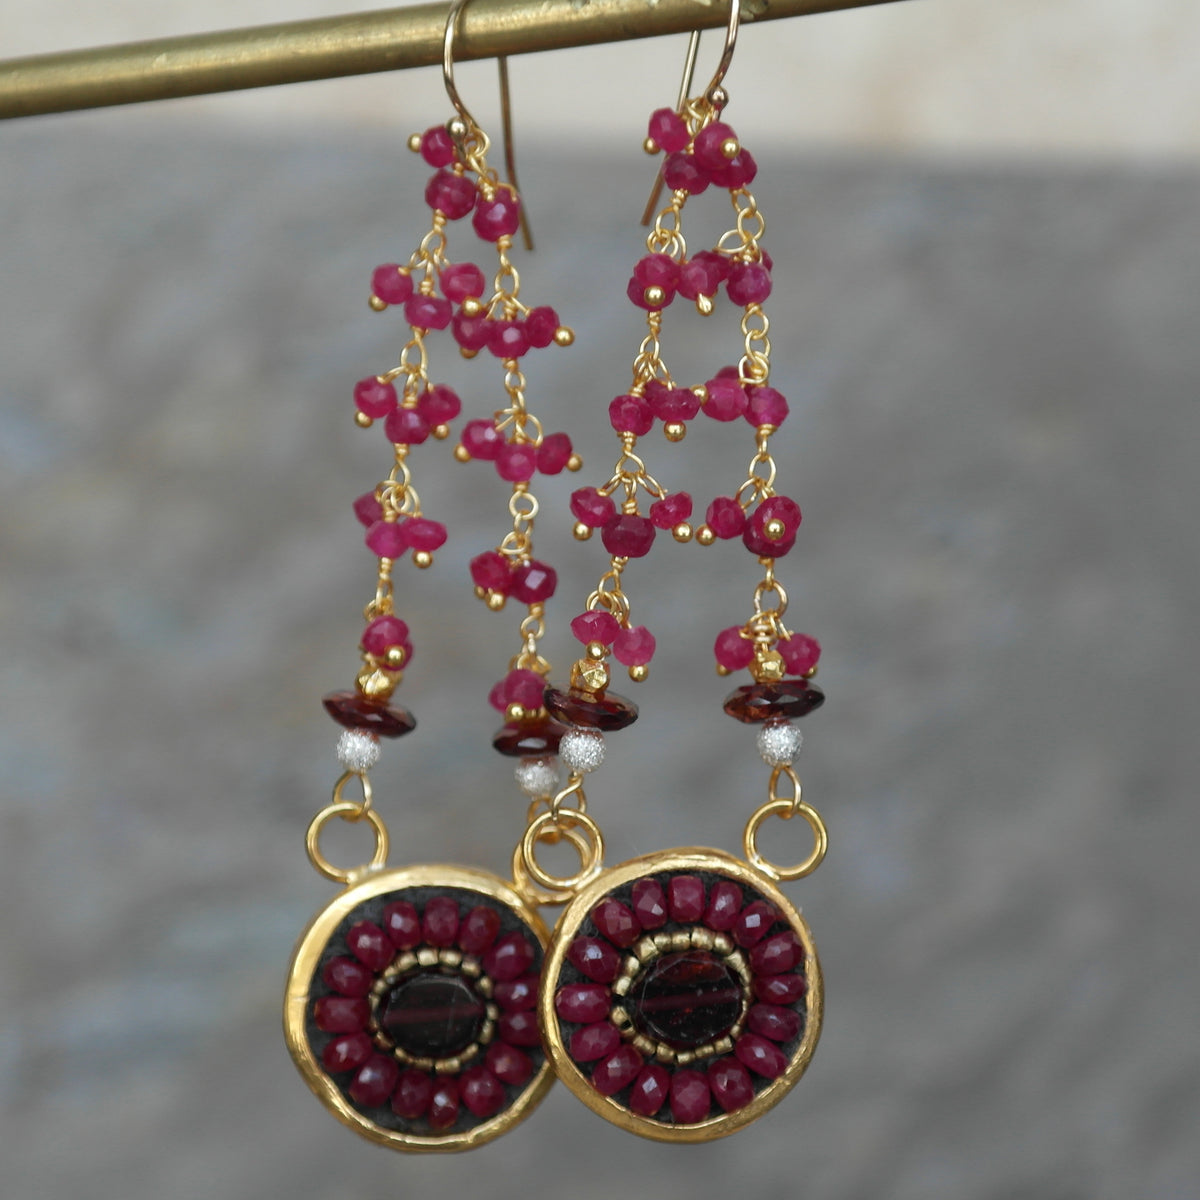 Who Needs Ruby Slippers (garnet and ruby mosaic earring)